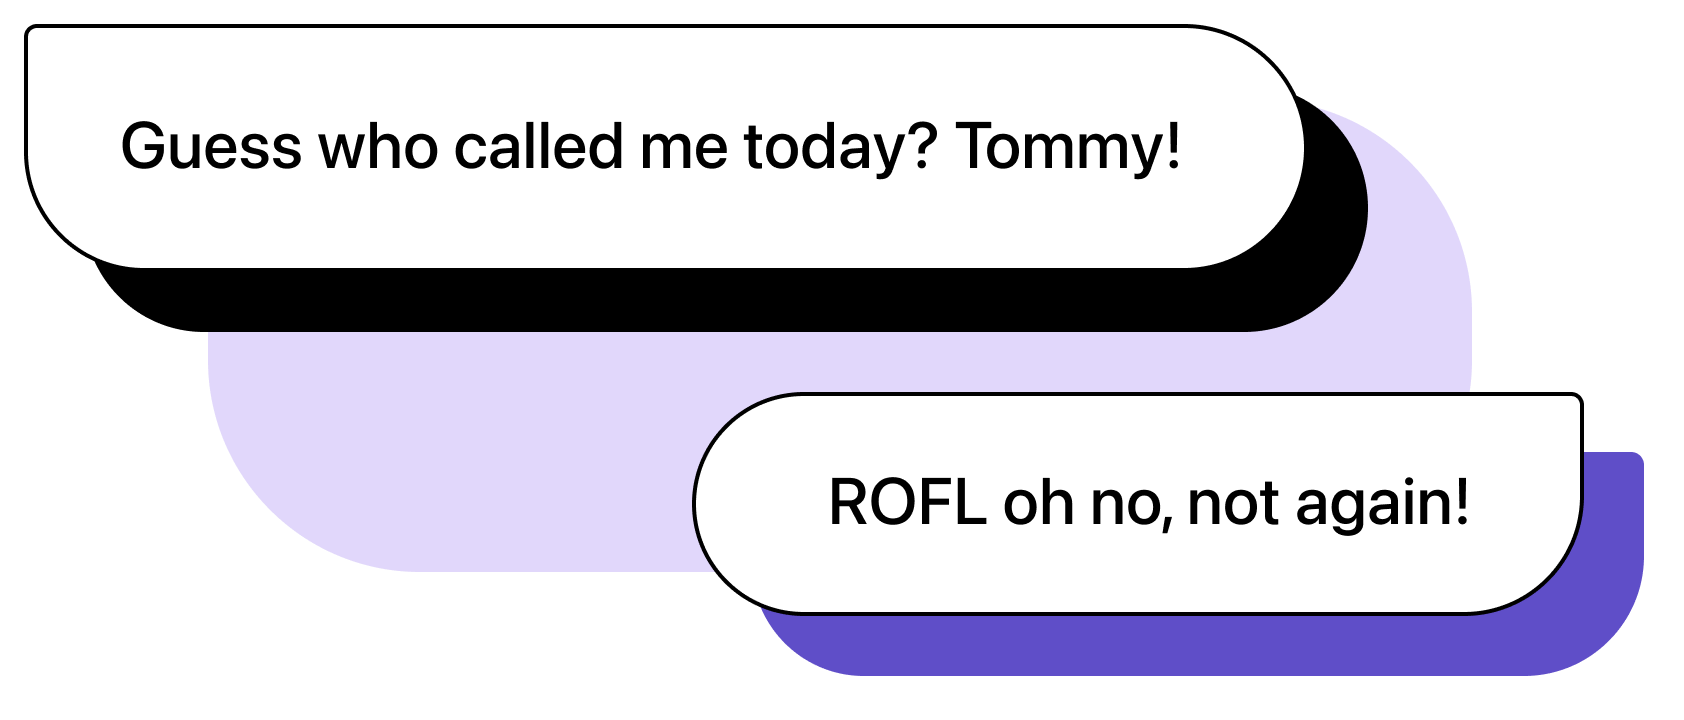 Two chat bubbles graphics. First message: "Guess who called me today? Tommy!". Second message: "ROFL oh no, not again!".